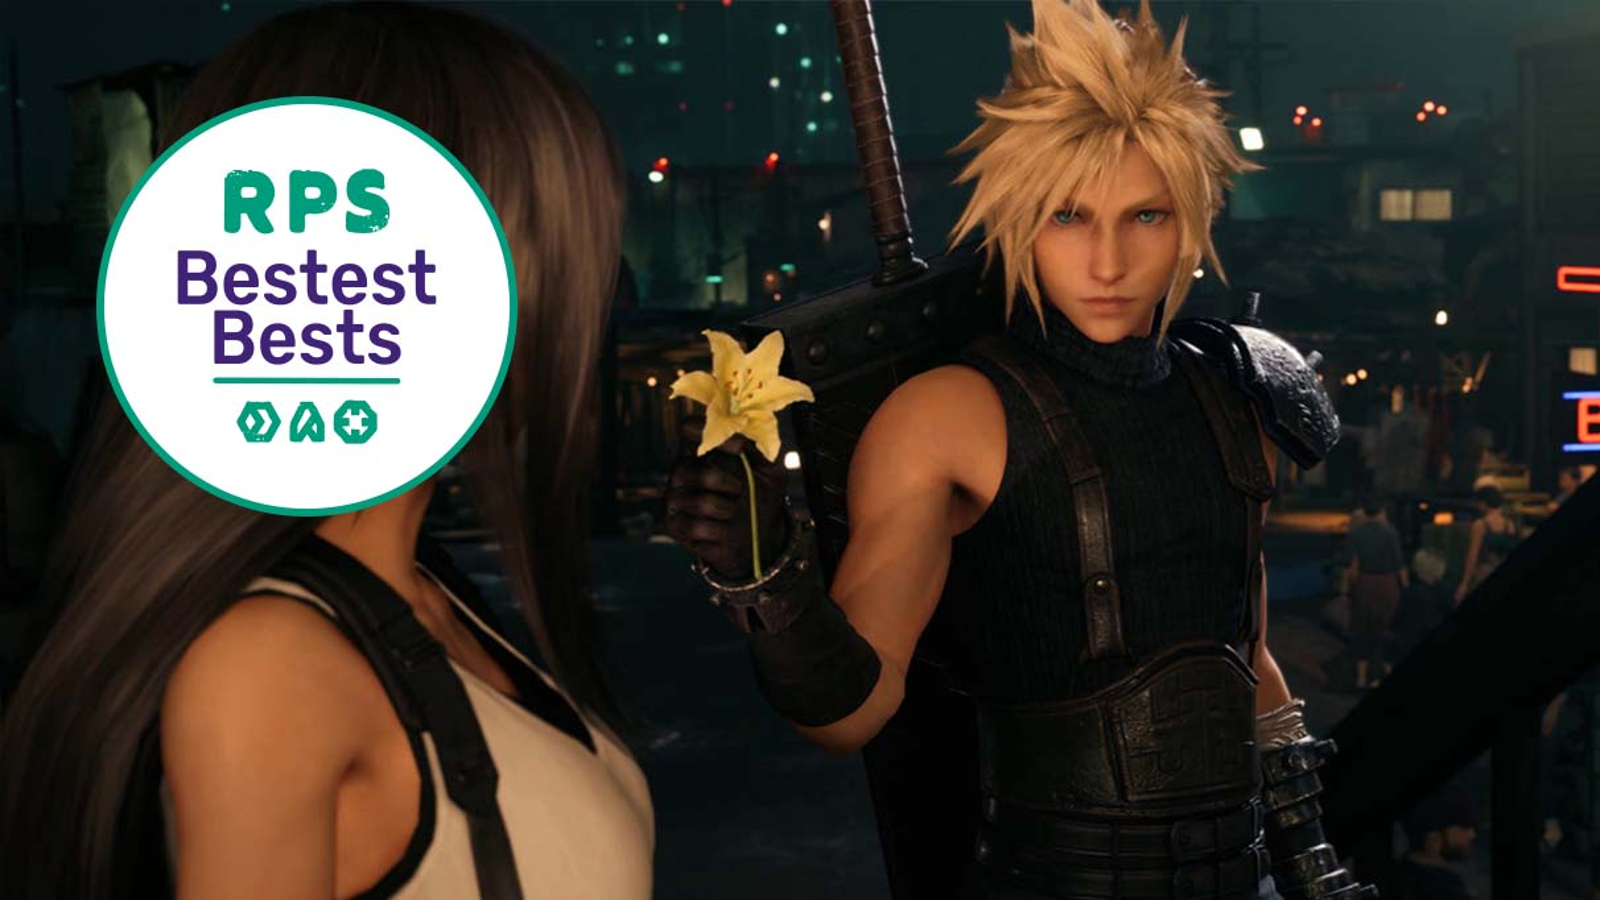 Final Fantasy 7 Remake Part 2 Release Date: PS4, PS5, Xbox, PC